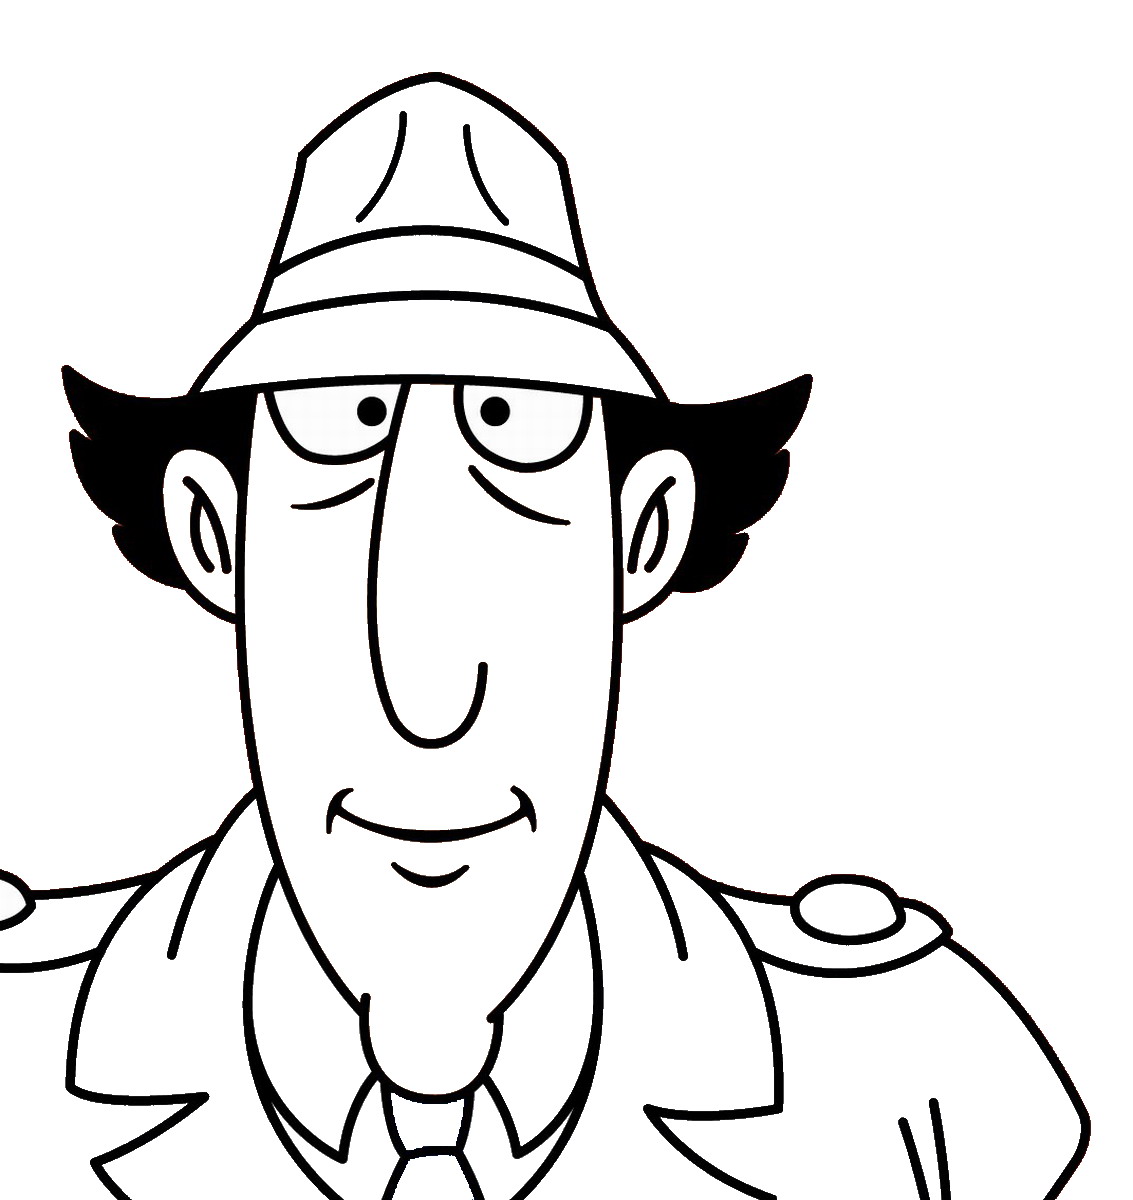 Inspector Gadget Coloring Pages - Learny Kids